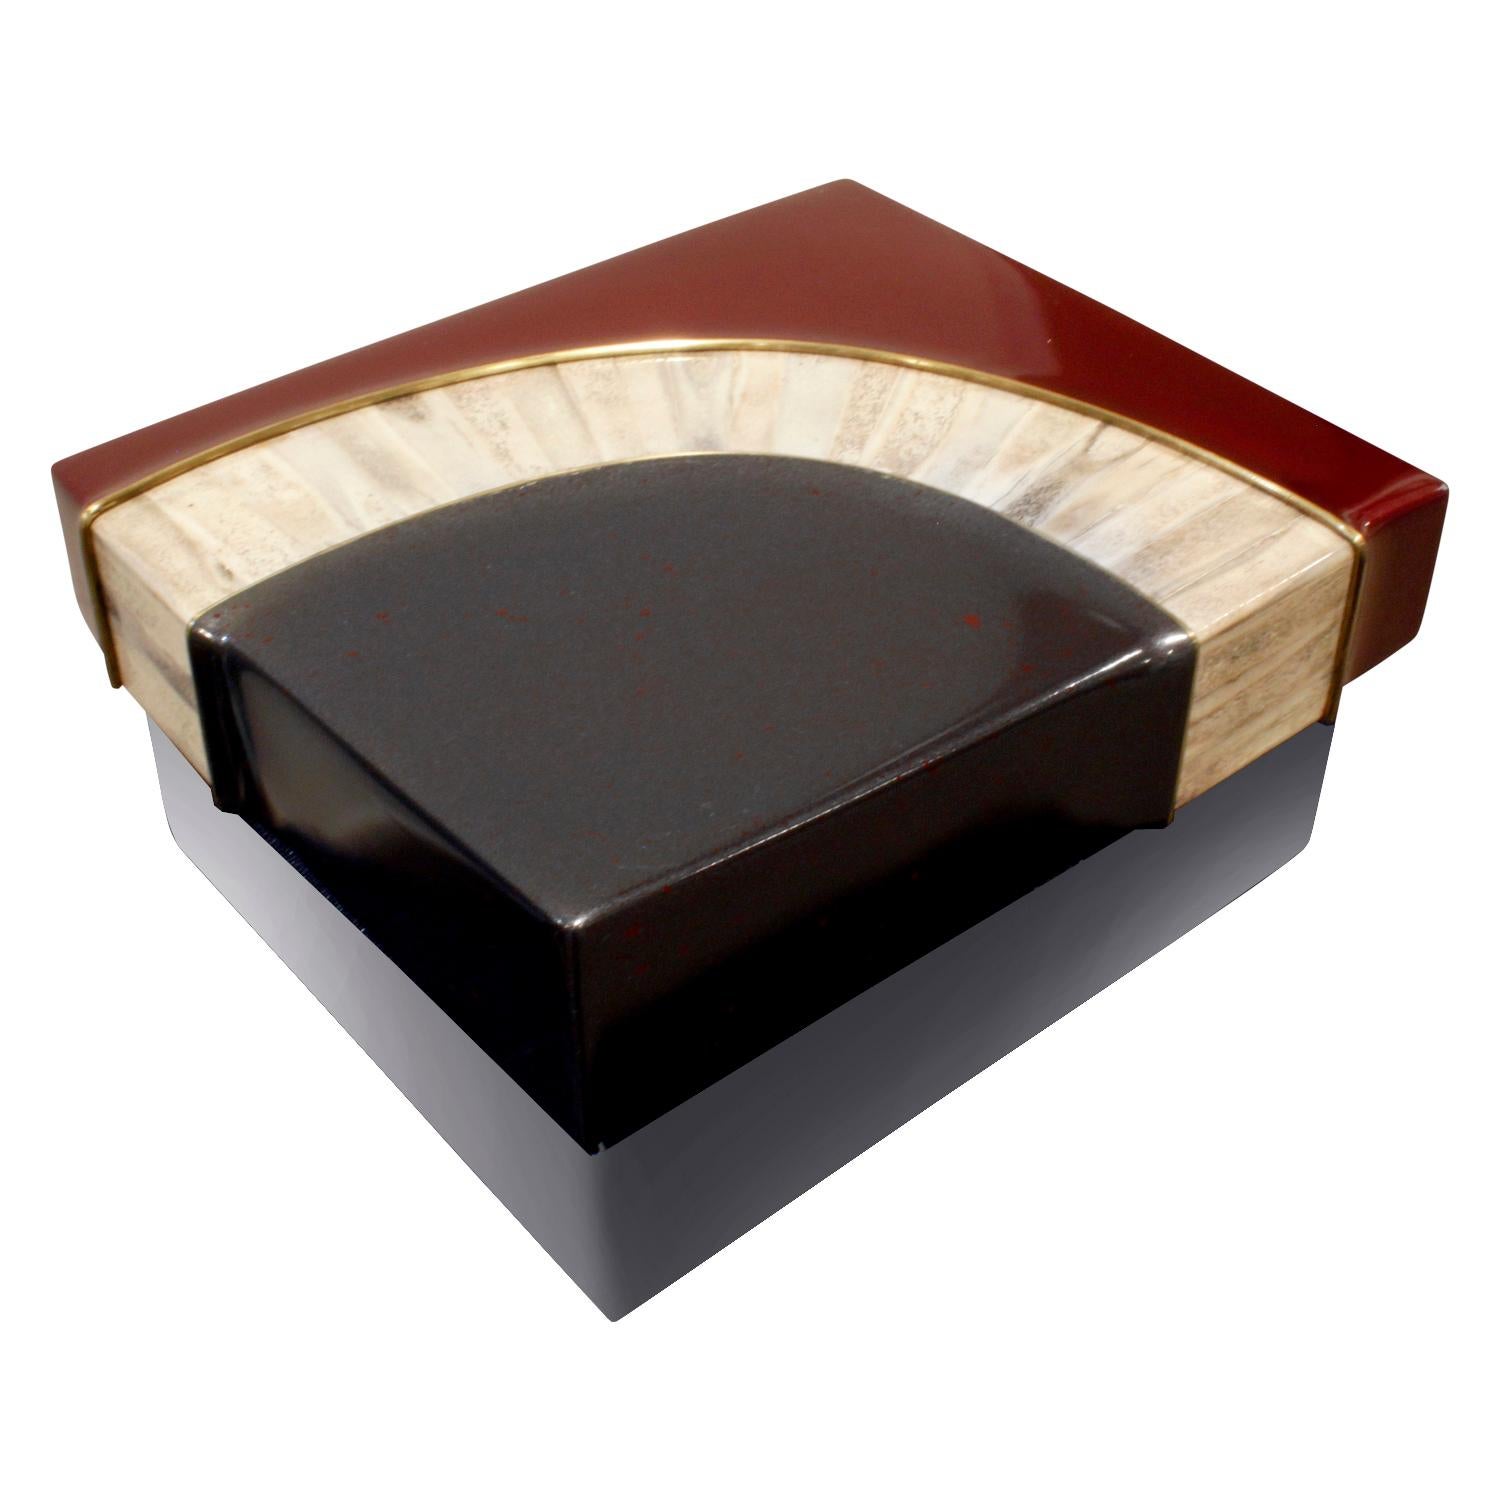 Exceptional box with sculptural cover in red and black glazierite with bone and brass accents, base in stainless steel and interior in burgundy suede by Johnson and Marcius for Lorin Marsh, 1980s.  Johnson and Marcius made special pieces which were